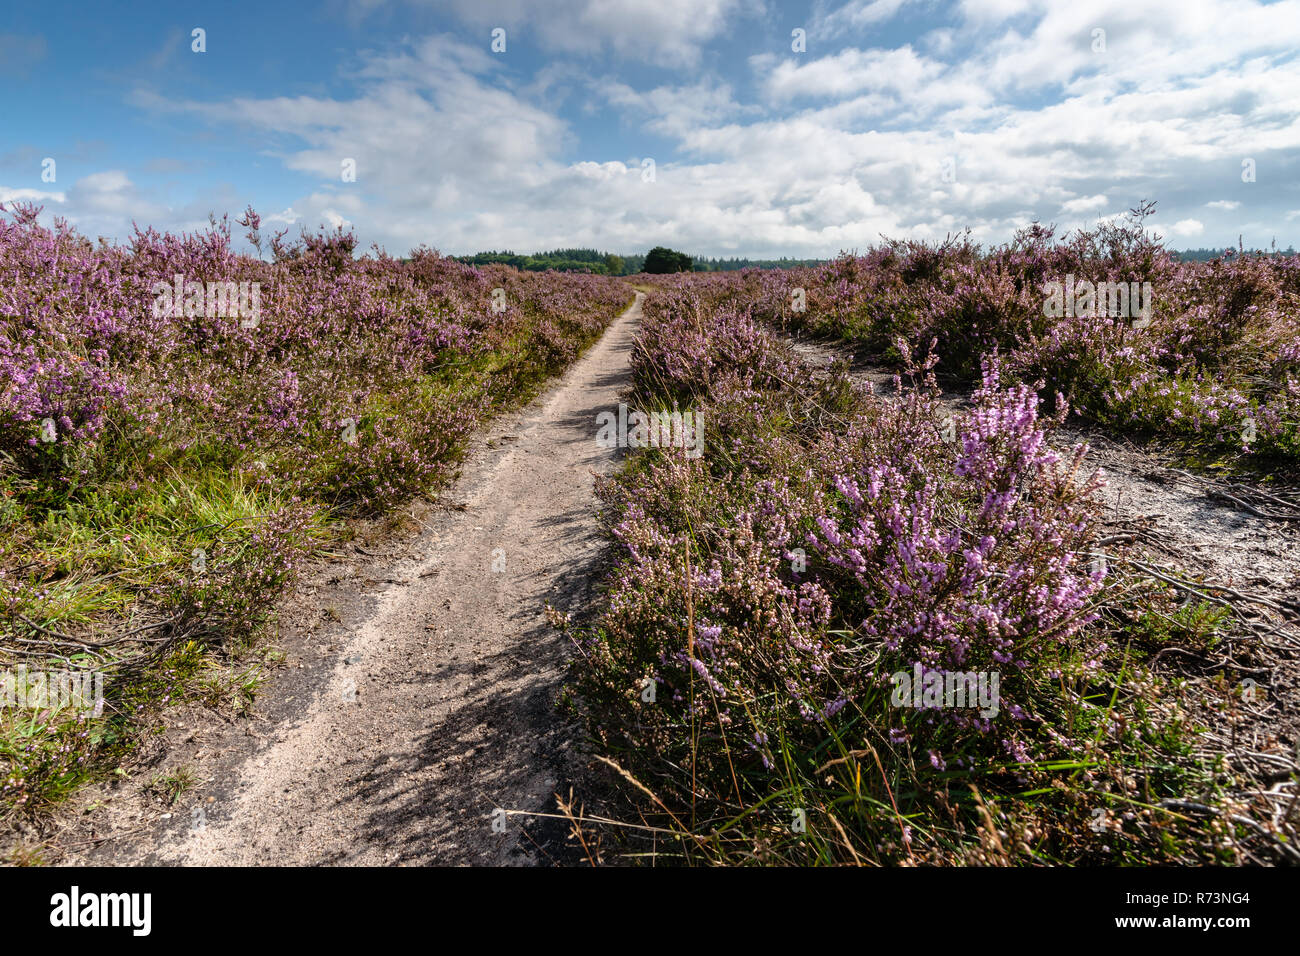 Sandpath in a pine forest with a lone birch tree. Nature landscape in the Netherlands with beautiful flowering heath full of purple flowers. Impressiv Stock Photo